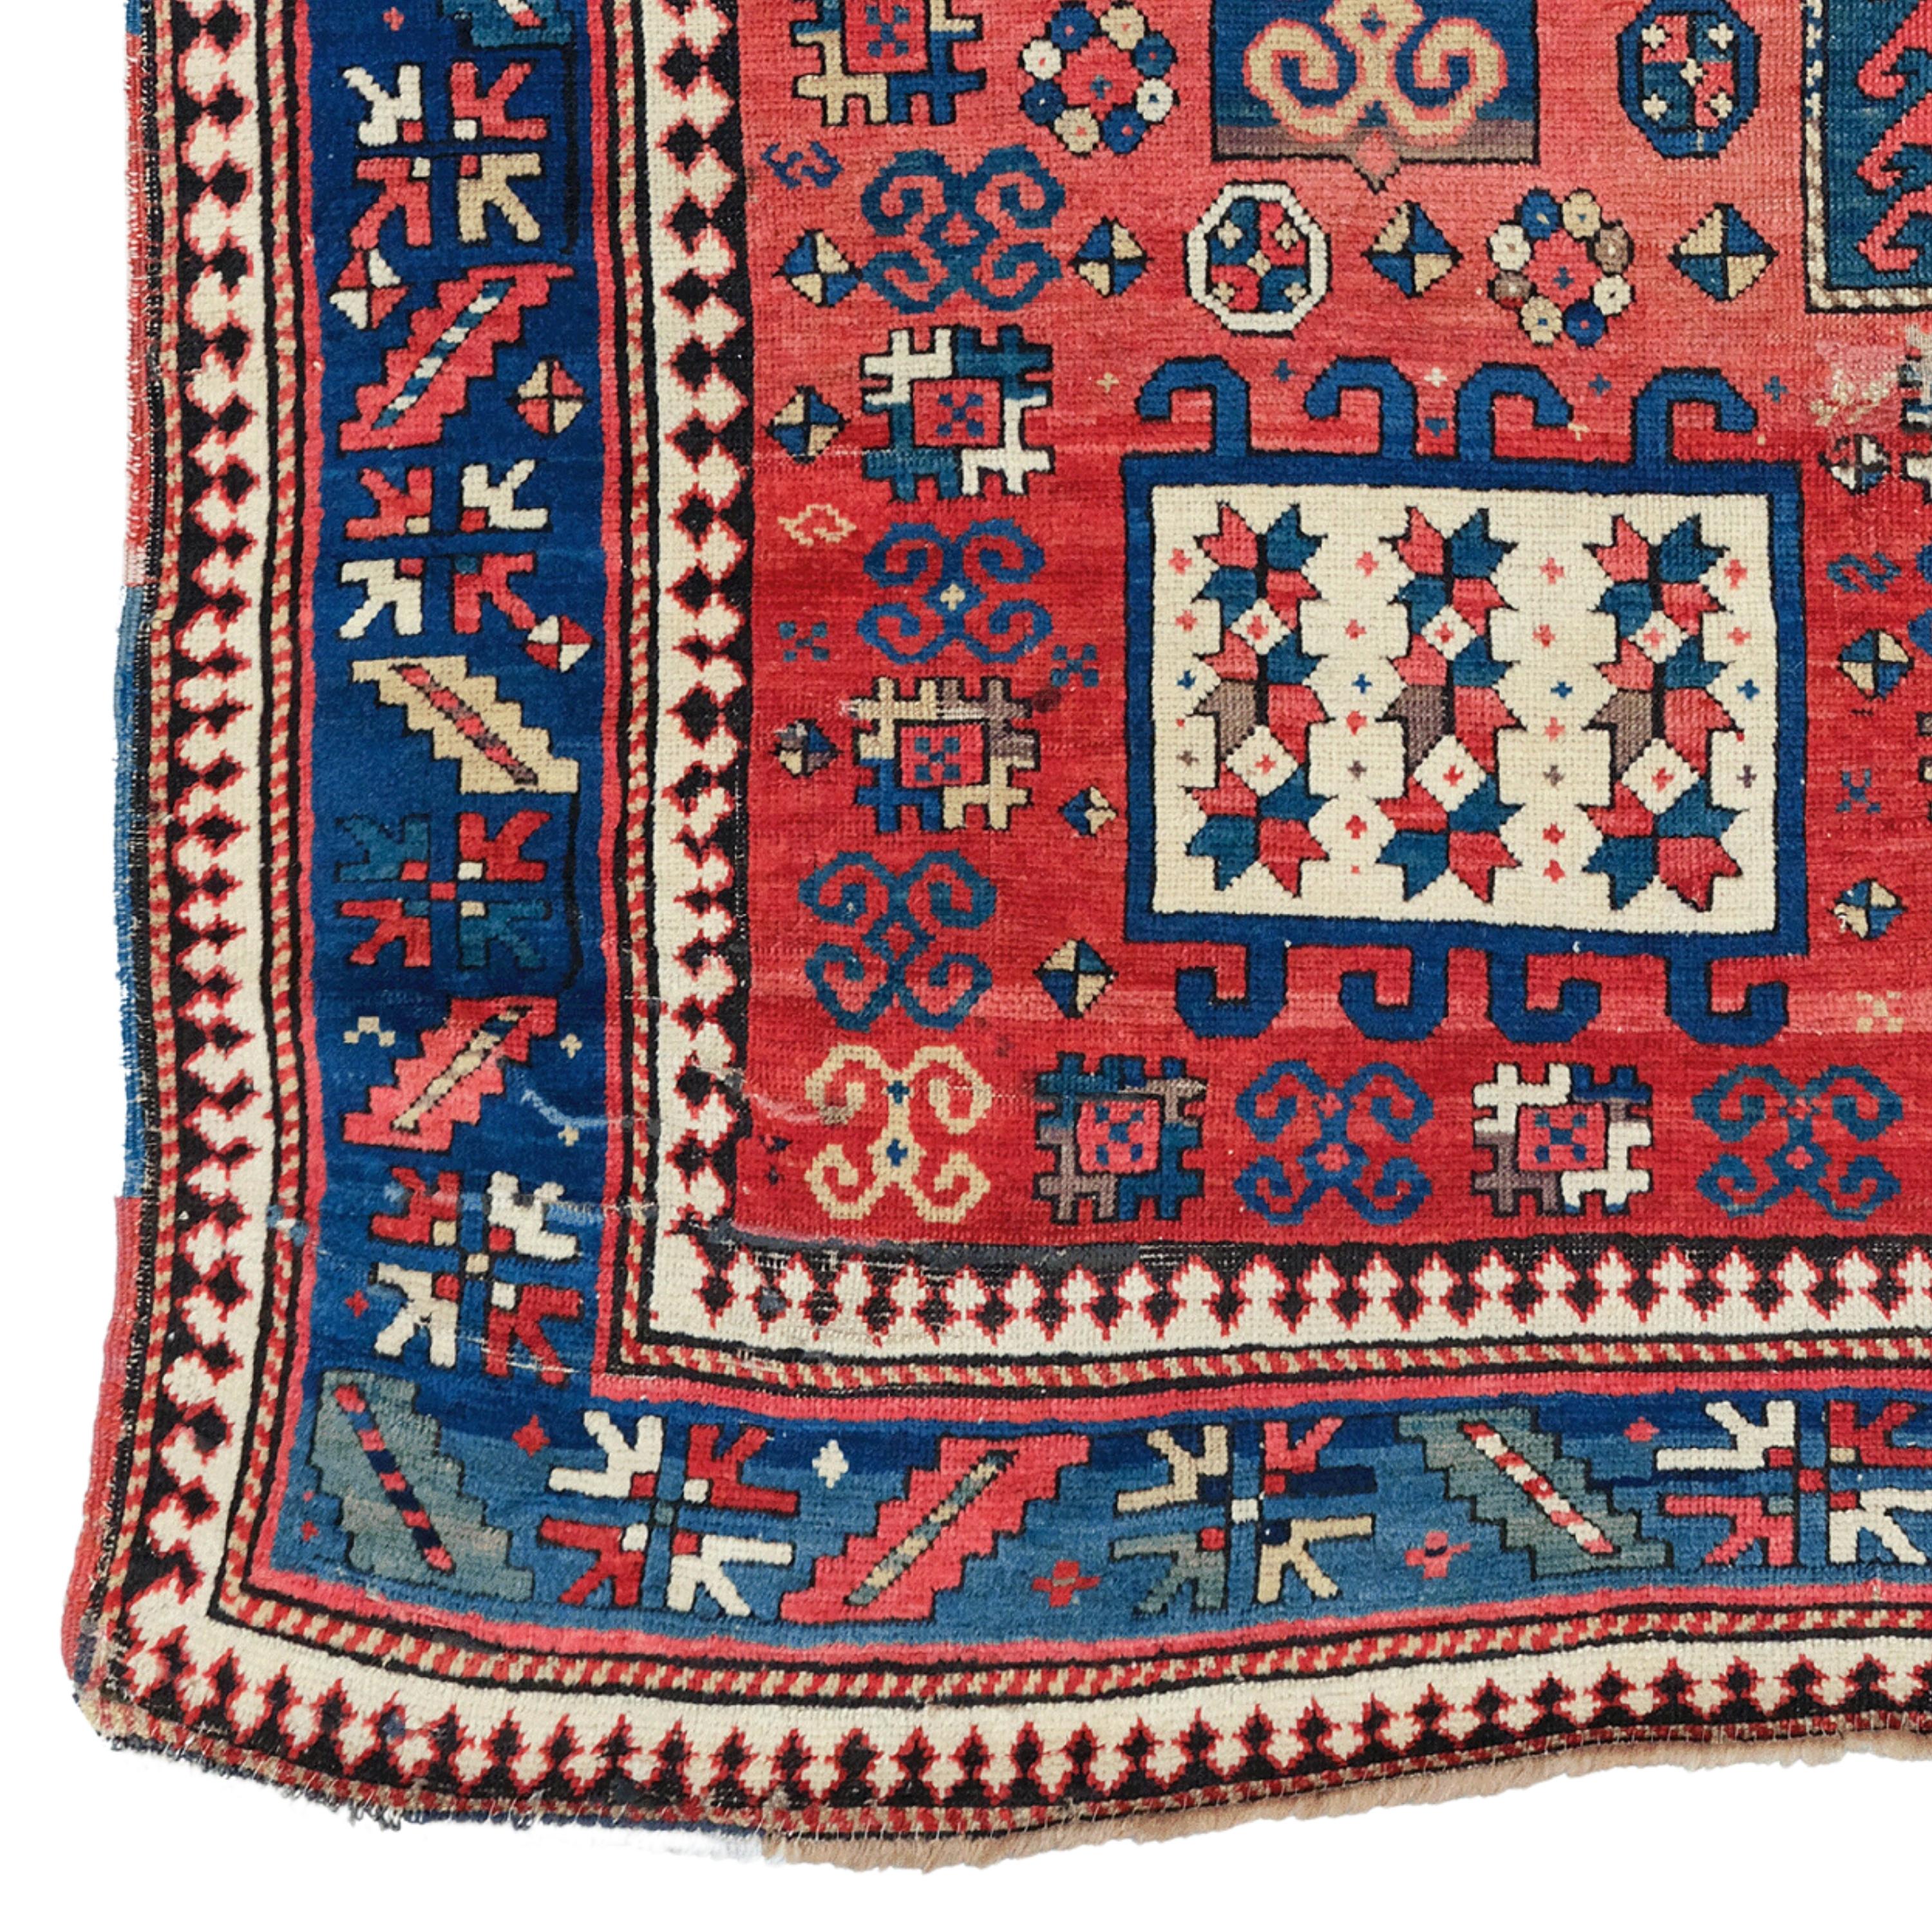 Antique Karachop Rug
19th Century Karachop Rug, Antique Rug
Size: 180x220cm  5,9x7,21 Ft

This 19th century Karachop rug will add a unique touch to your space with its historical and cultural richness. Drawing attention with its vibrant colors and